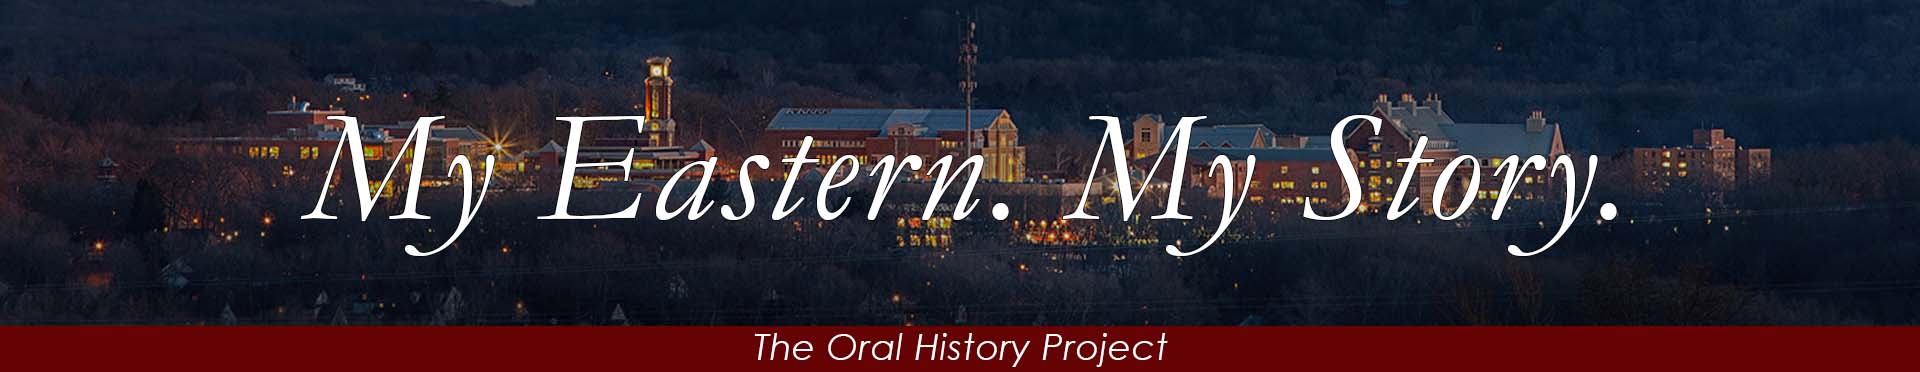 My Eastern. My Story. The oral history project.